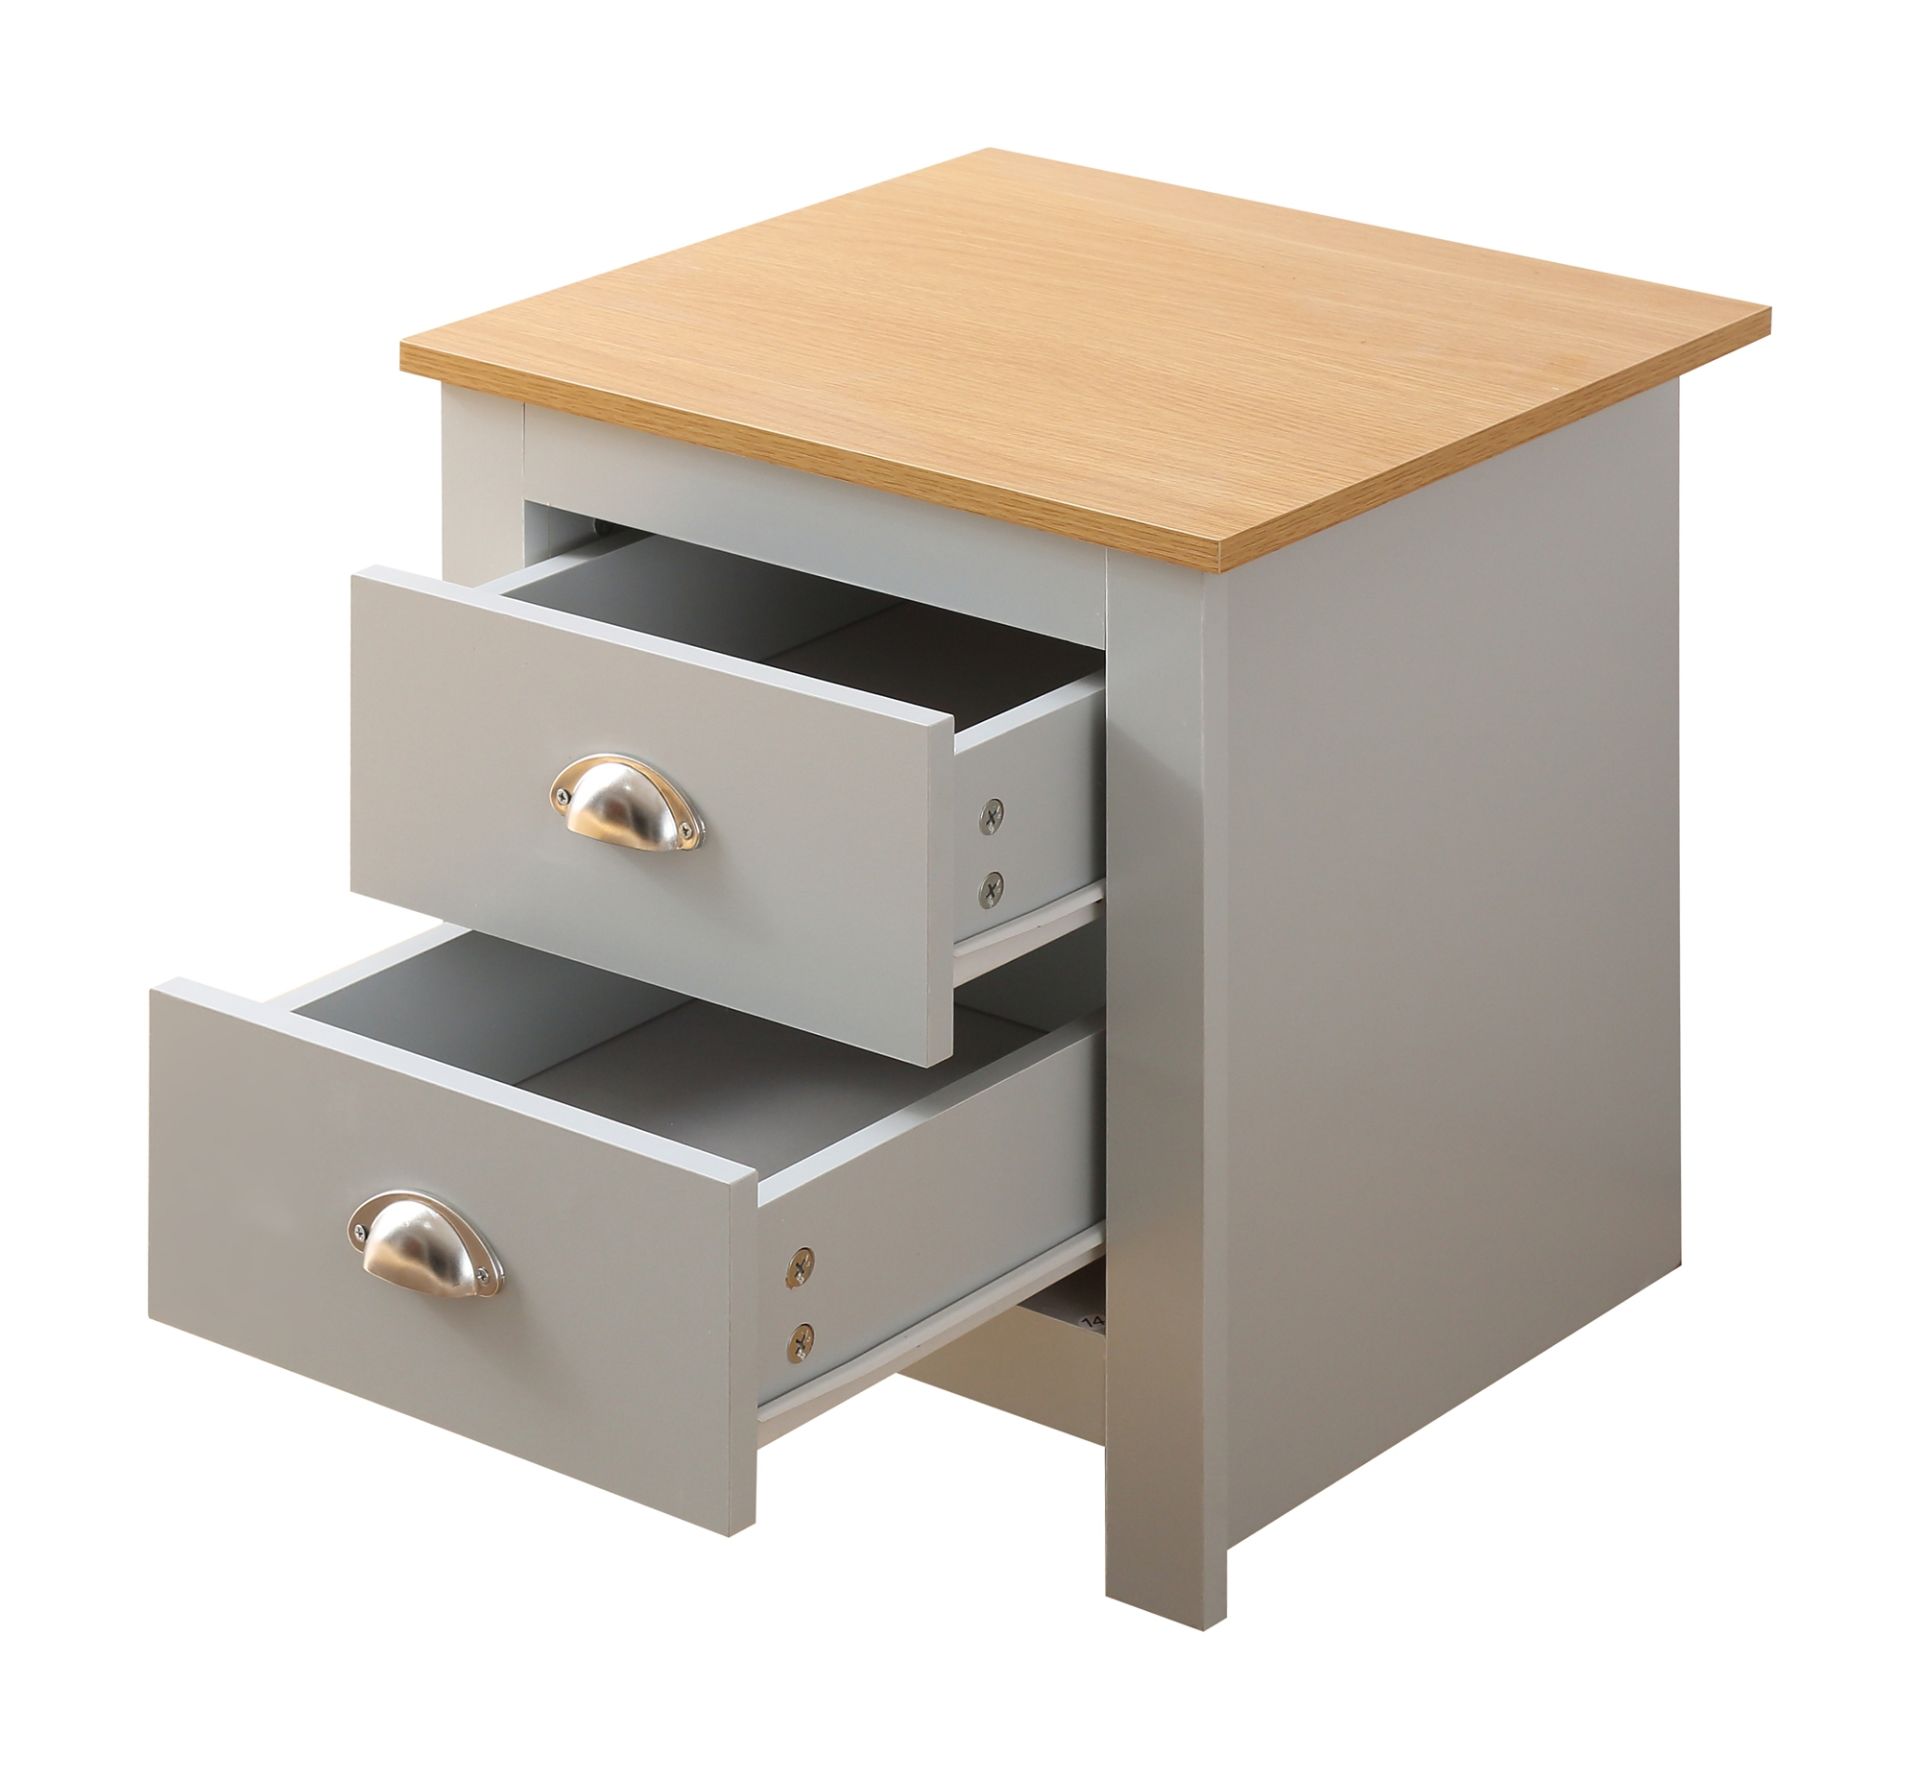 20 X BRAND NEW FLAT PACKED GREY WITH OAK TOP SHAKER-INSPIRED STYLISH DESIGN BEDSIDES - Image 4 of 4